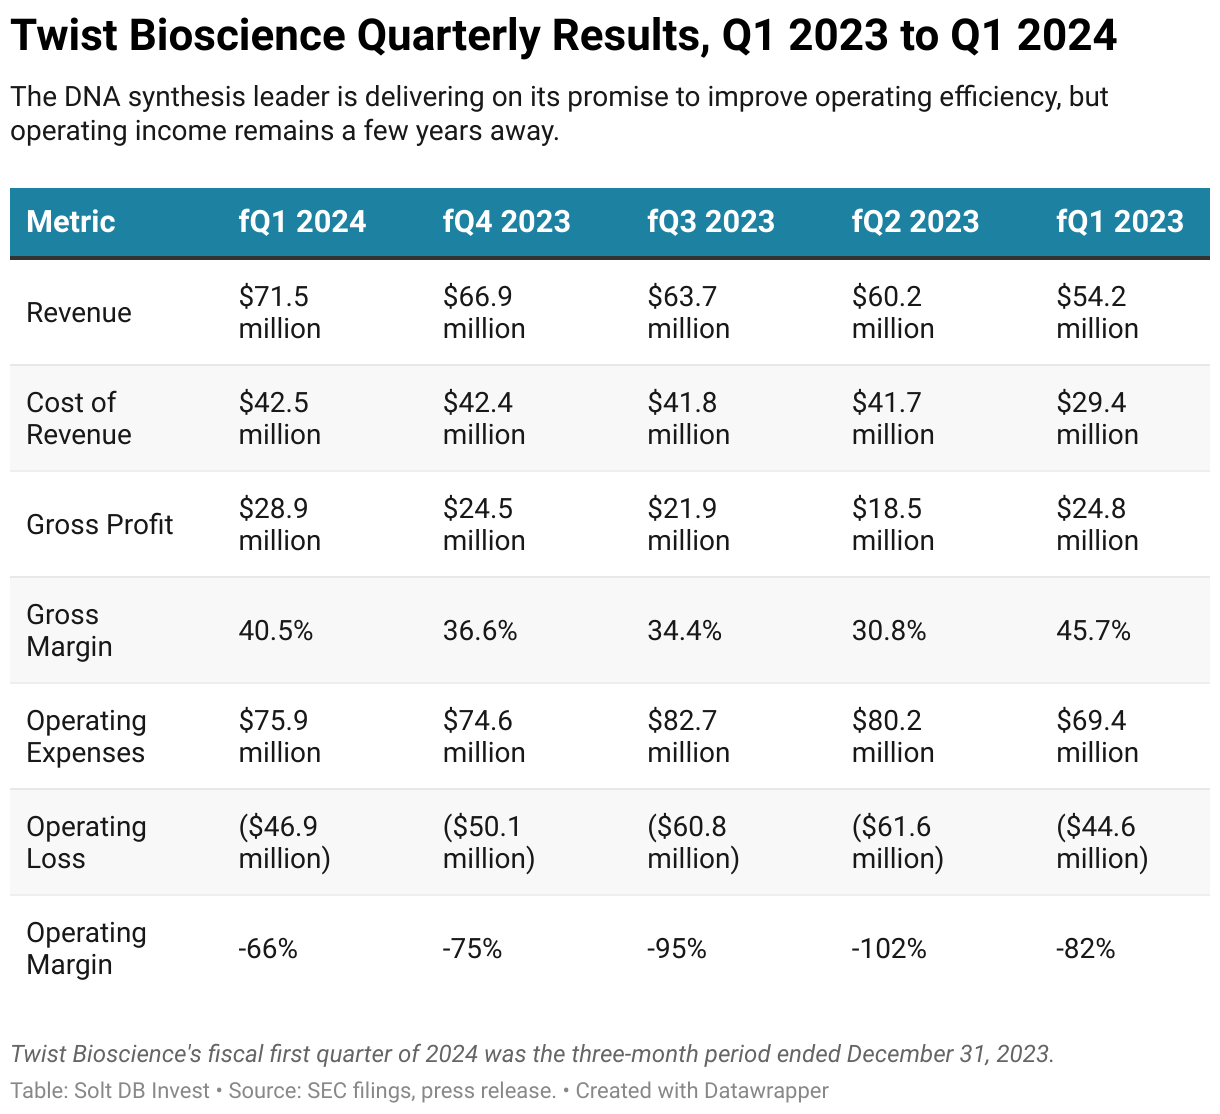 A table showing key operating metrics for Twist Bioscience from the fiscal first quarter of 2023 to the fiscal first quarter of 2024.